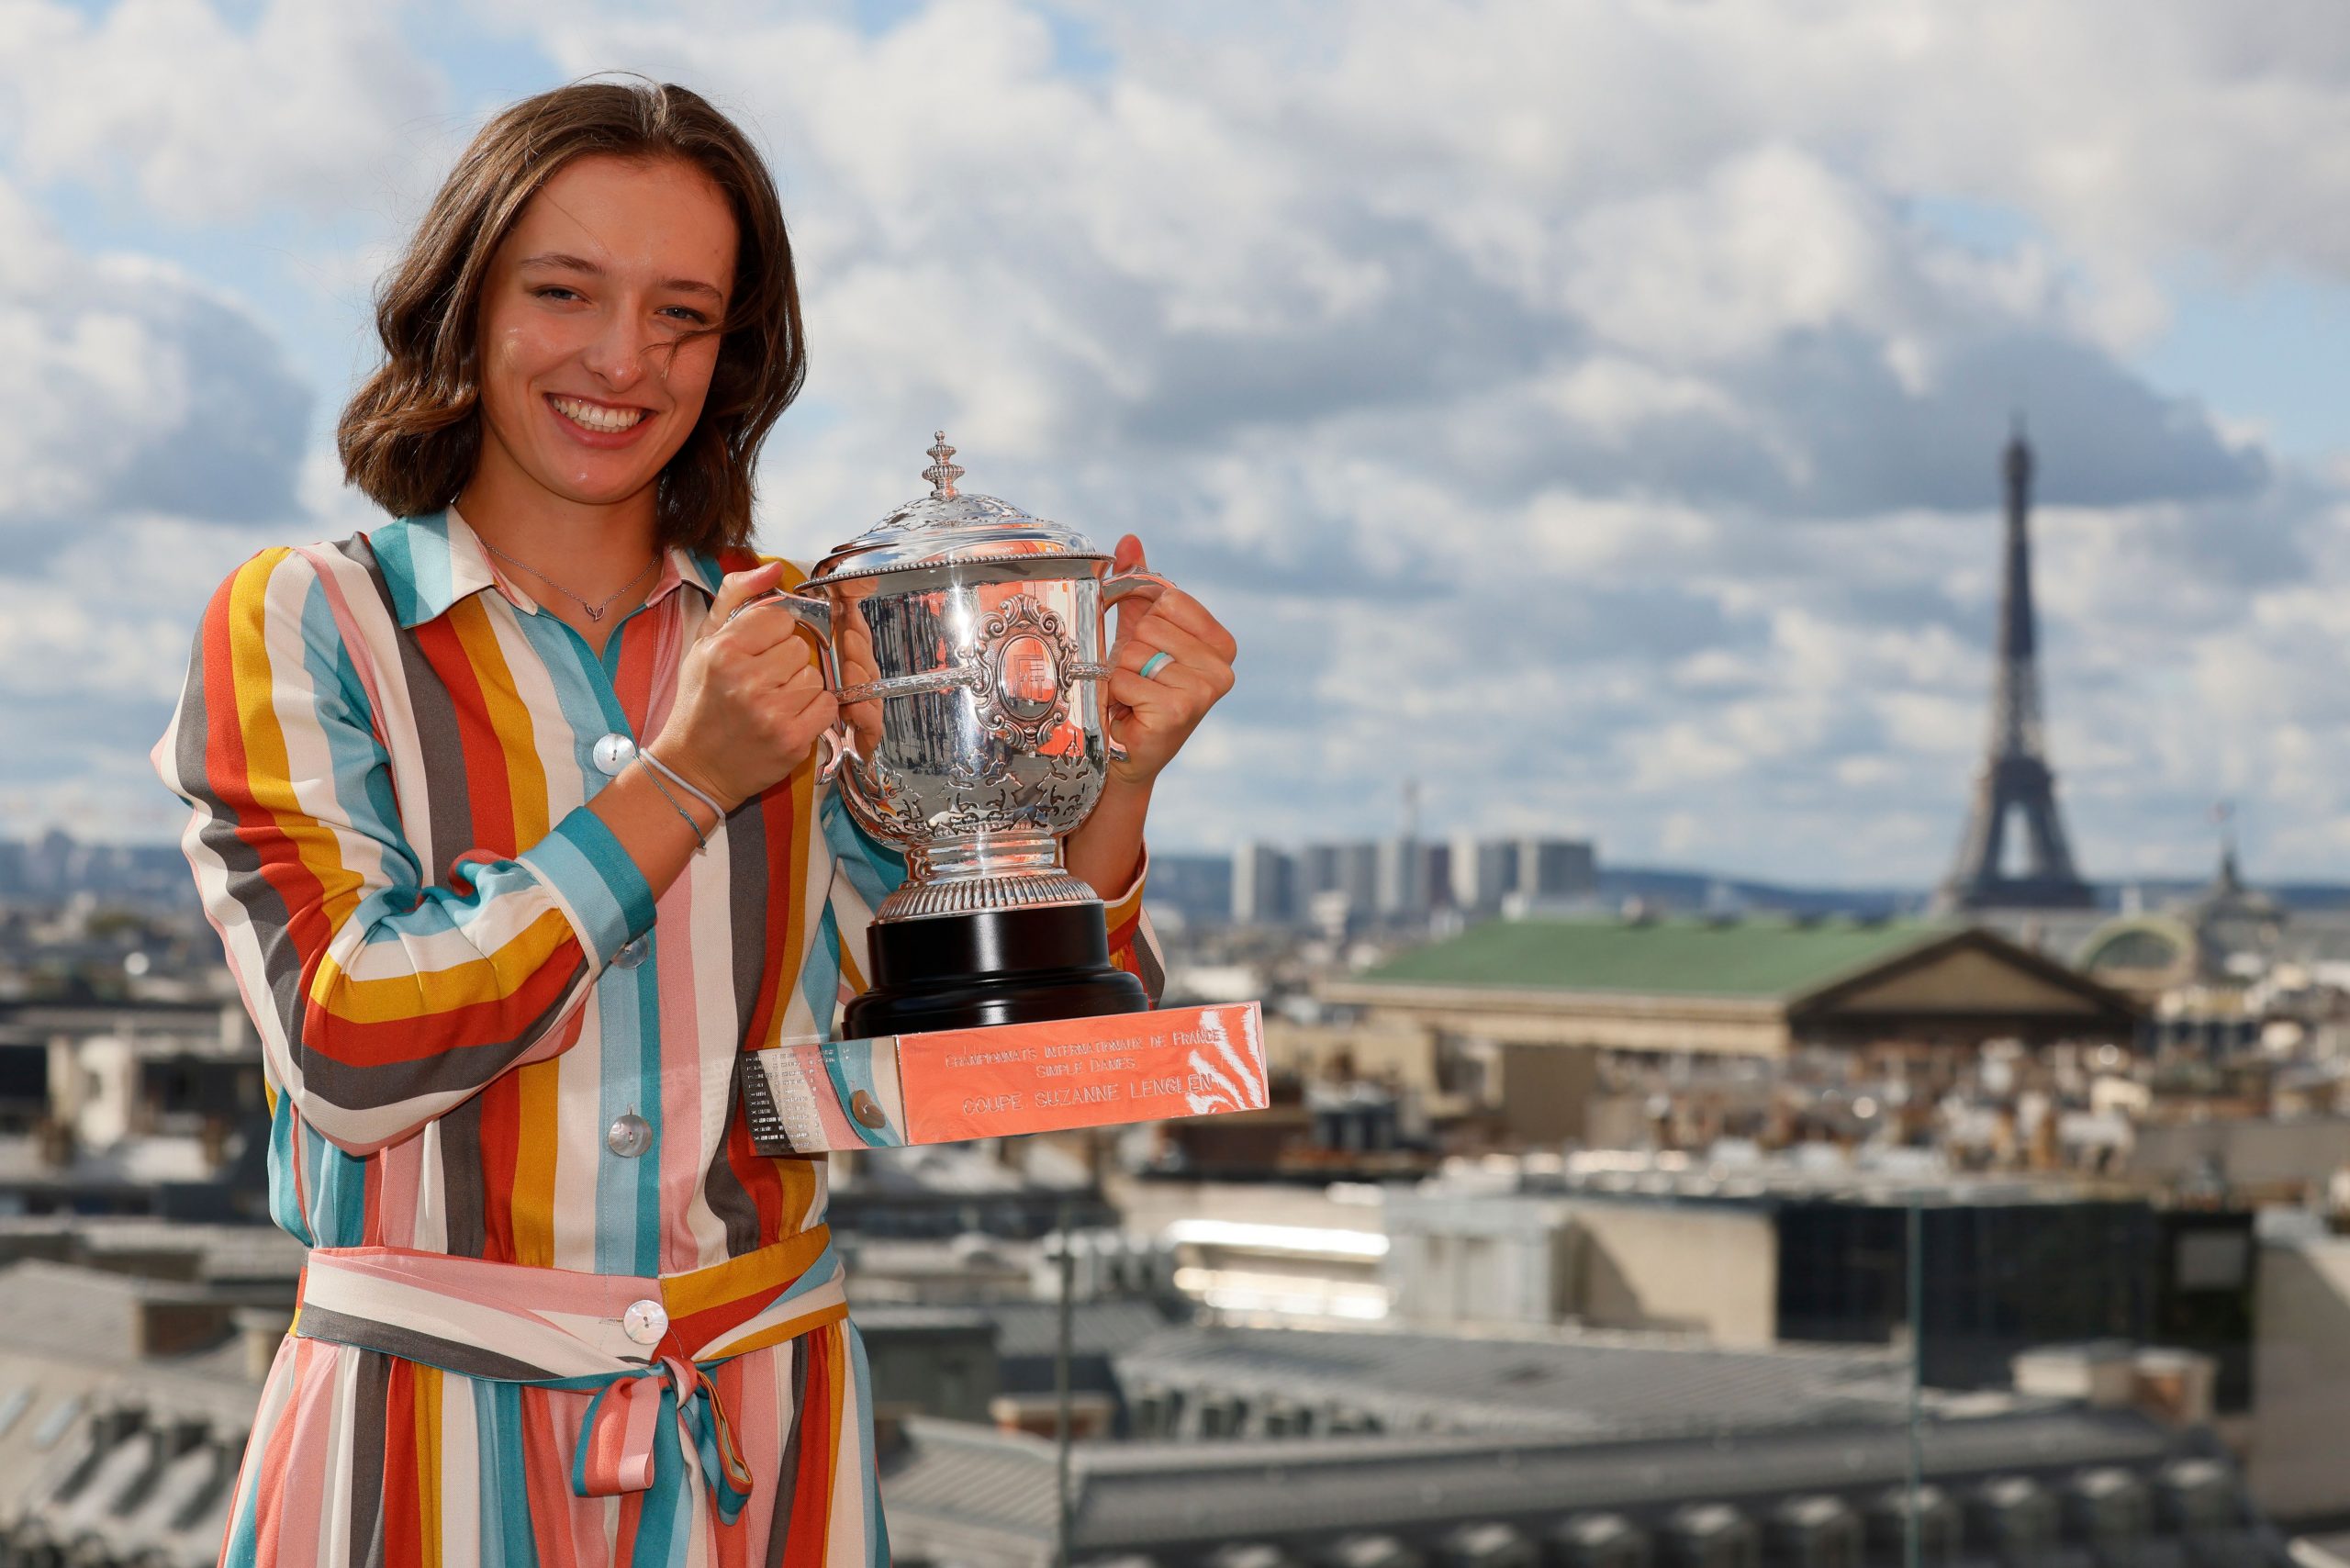 Twitter reacts to Iga Swiatek exiting the 2021 French Open